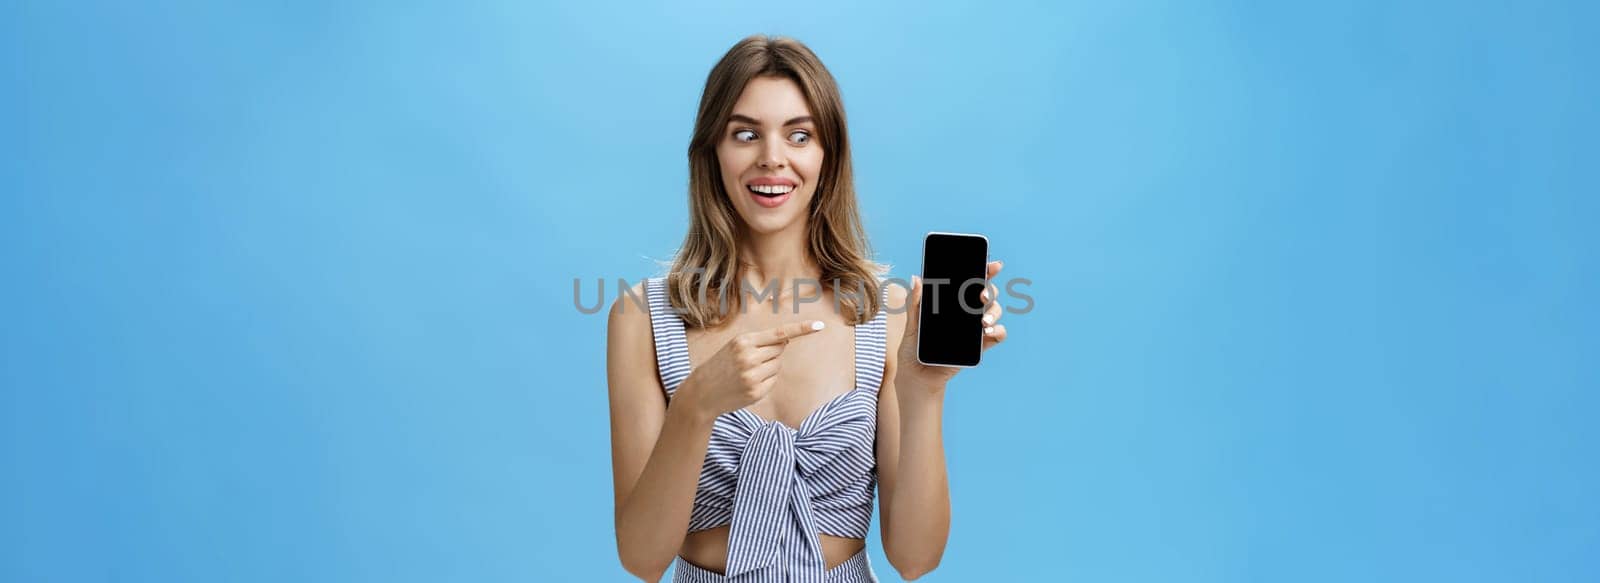 Portrait of charismatic astonished and happy woman with cute gapped teeth smiling axcited and surprised holding awesome smartphone pointing at device screen and looking at gadget amazed and delighted. Lifestyle.